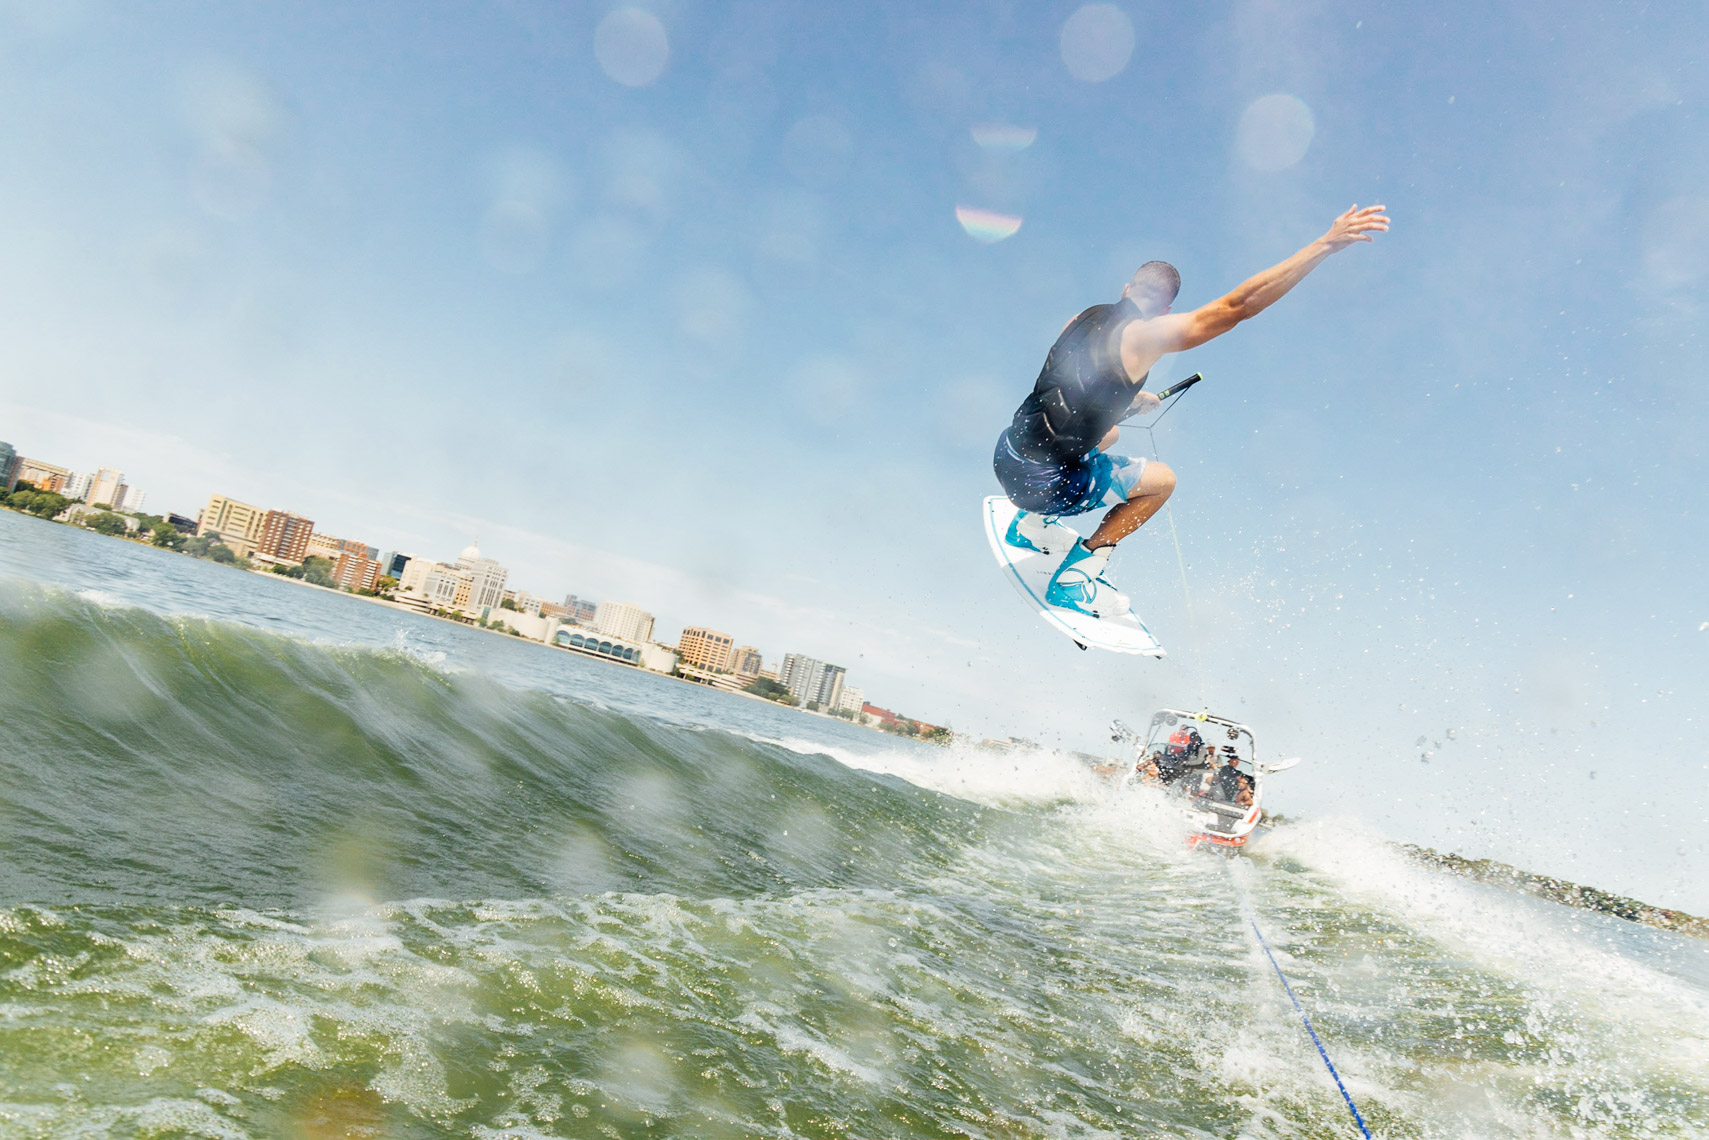 20210808_JD_WIS_D5_C050_MADISON_WAKEBOARDING_16082